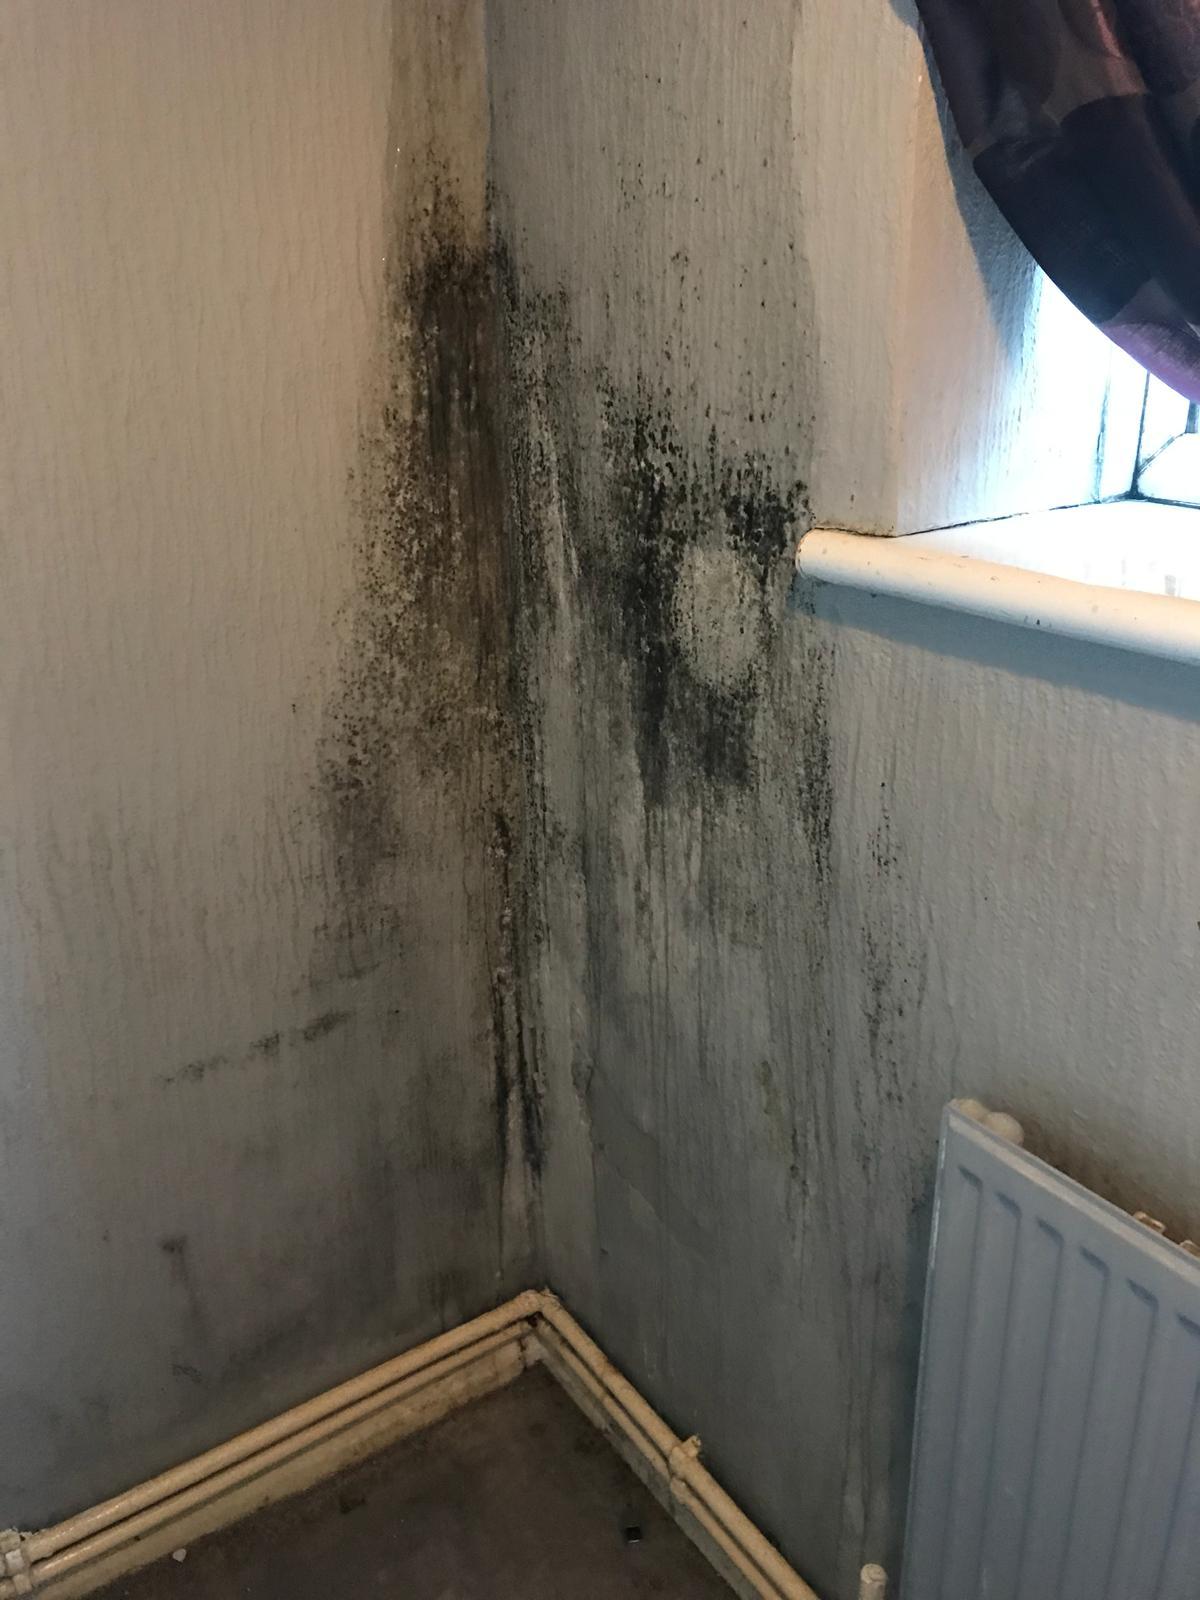  Mould clings to the walls in the two-bedroom property